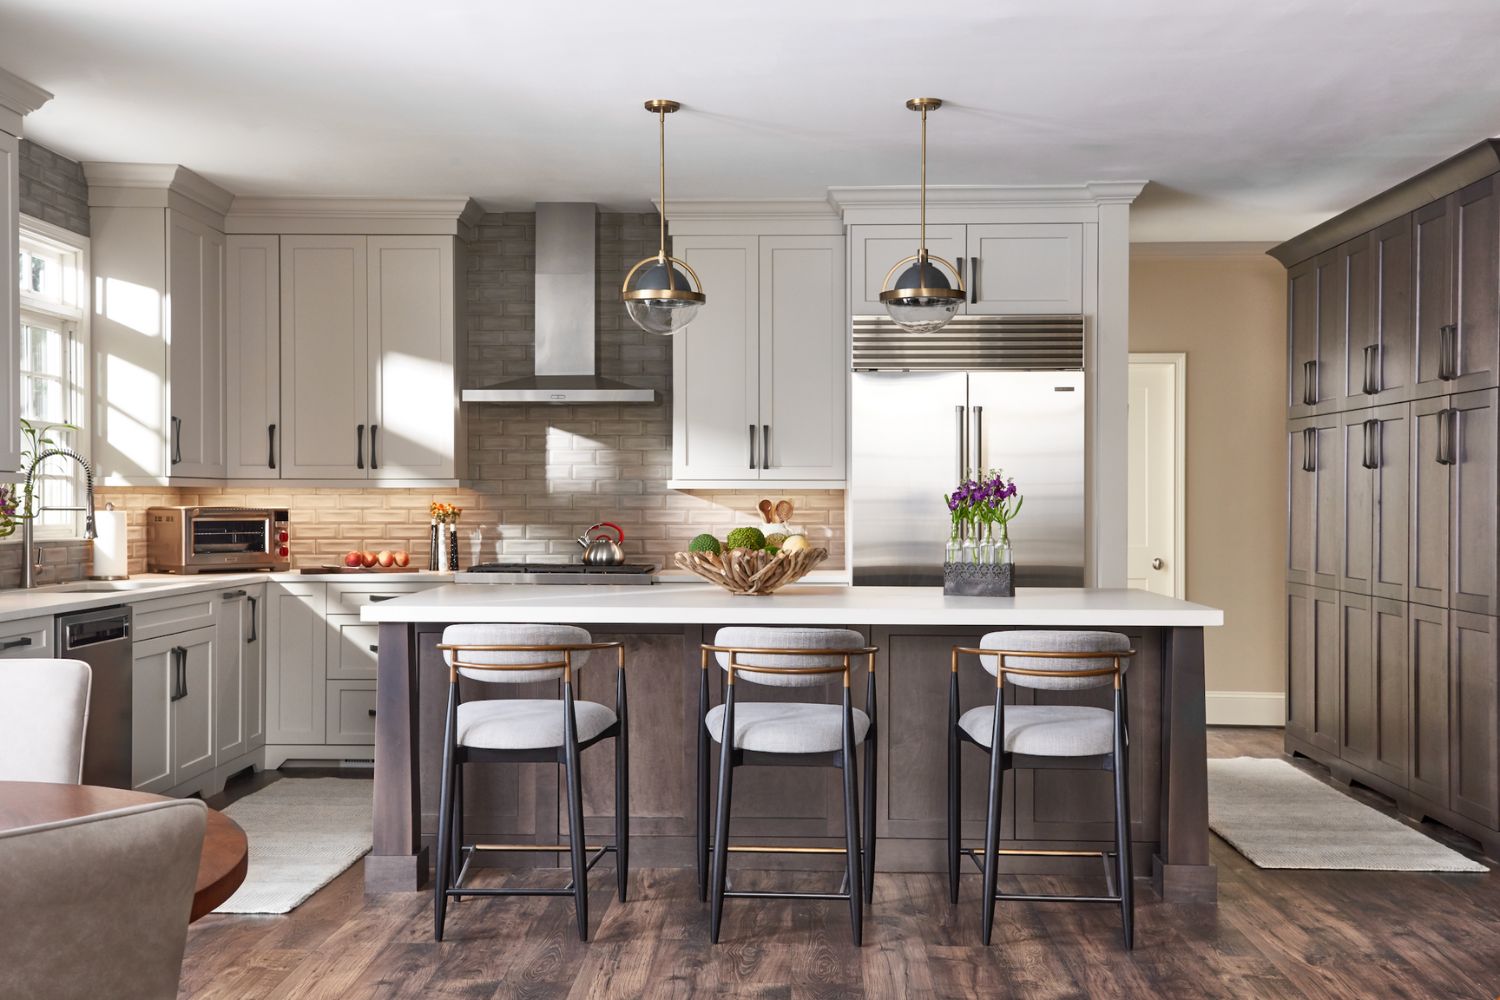 A gourmet kitchen with a center island and stools.